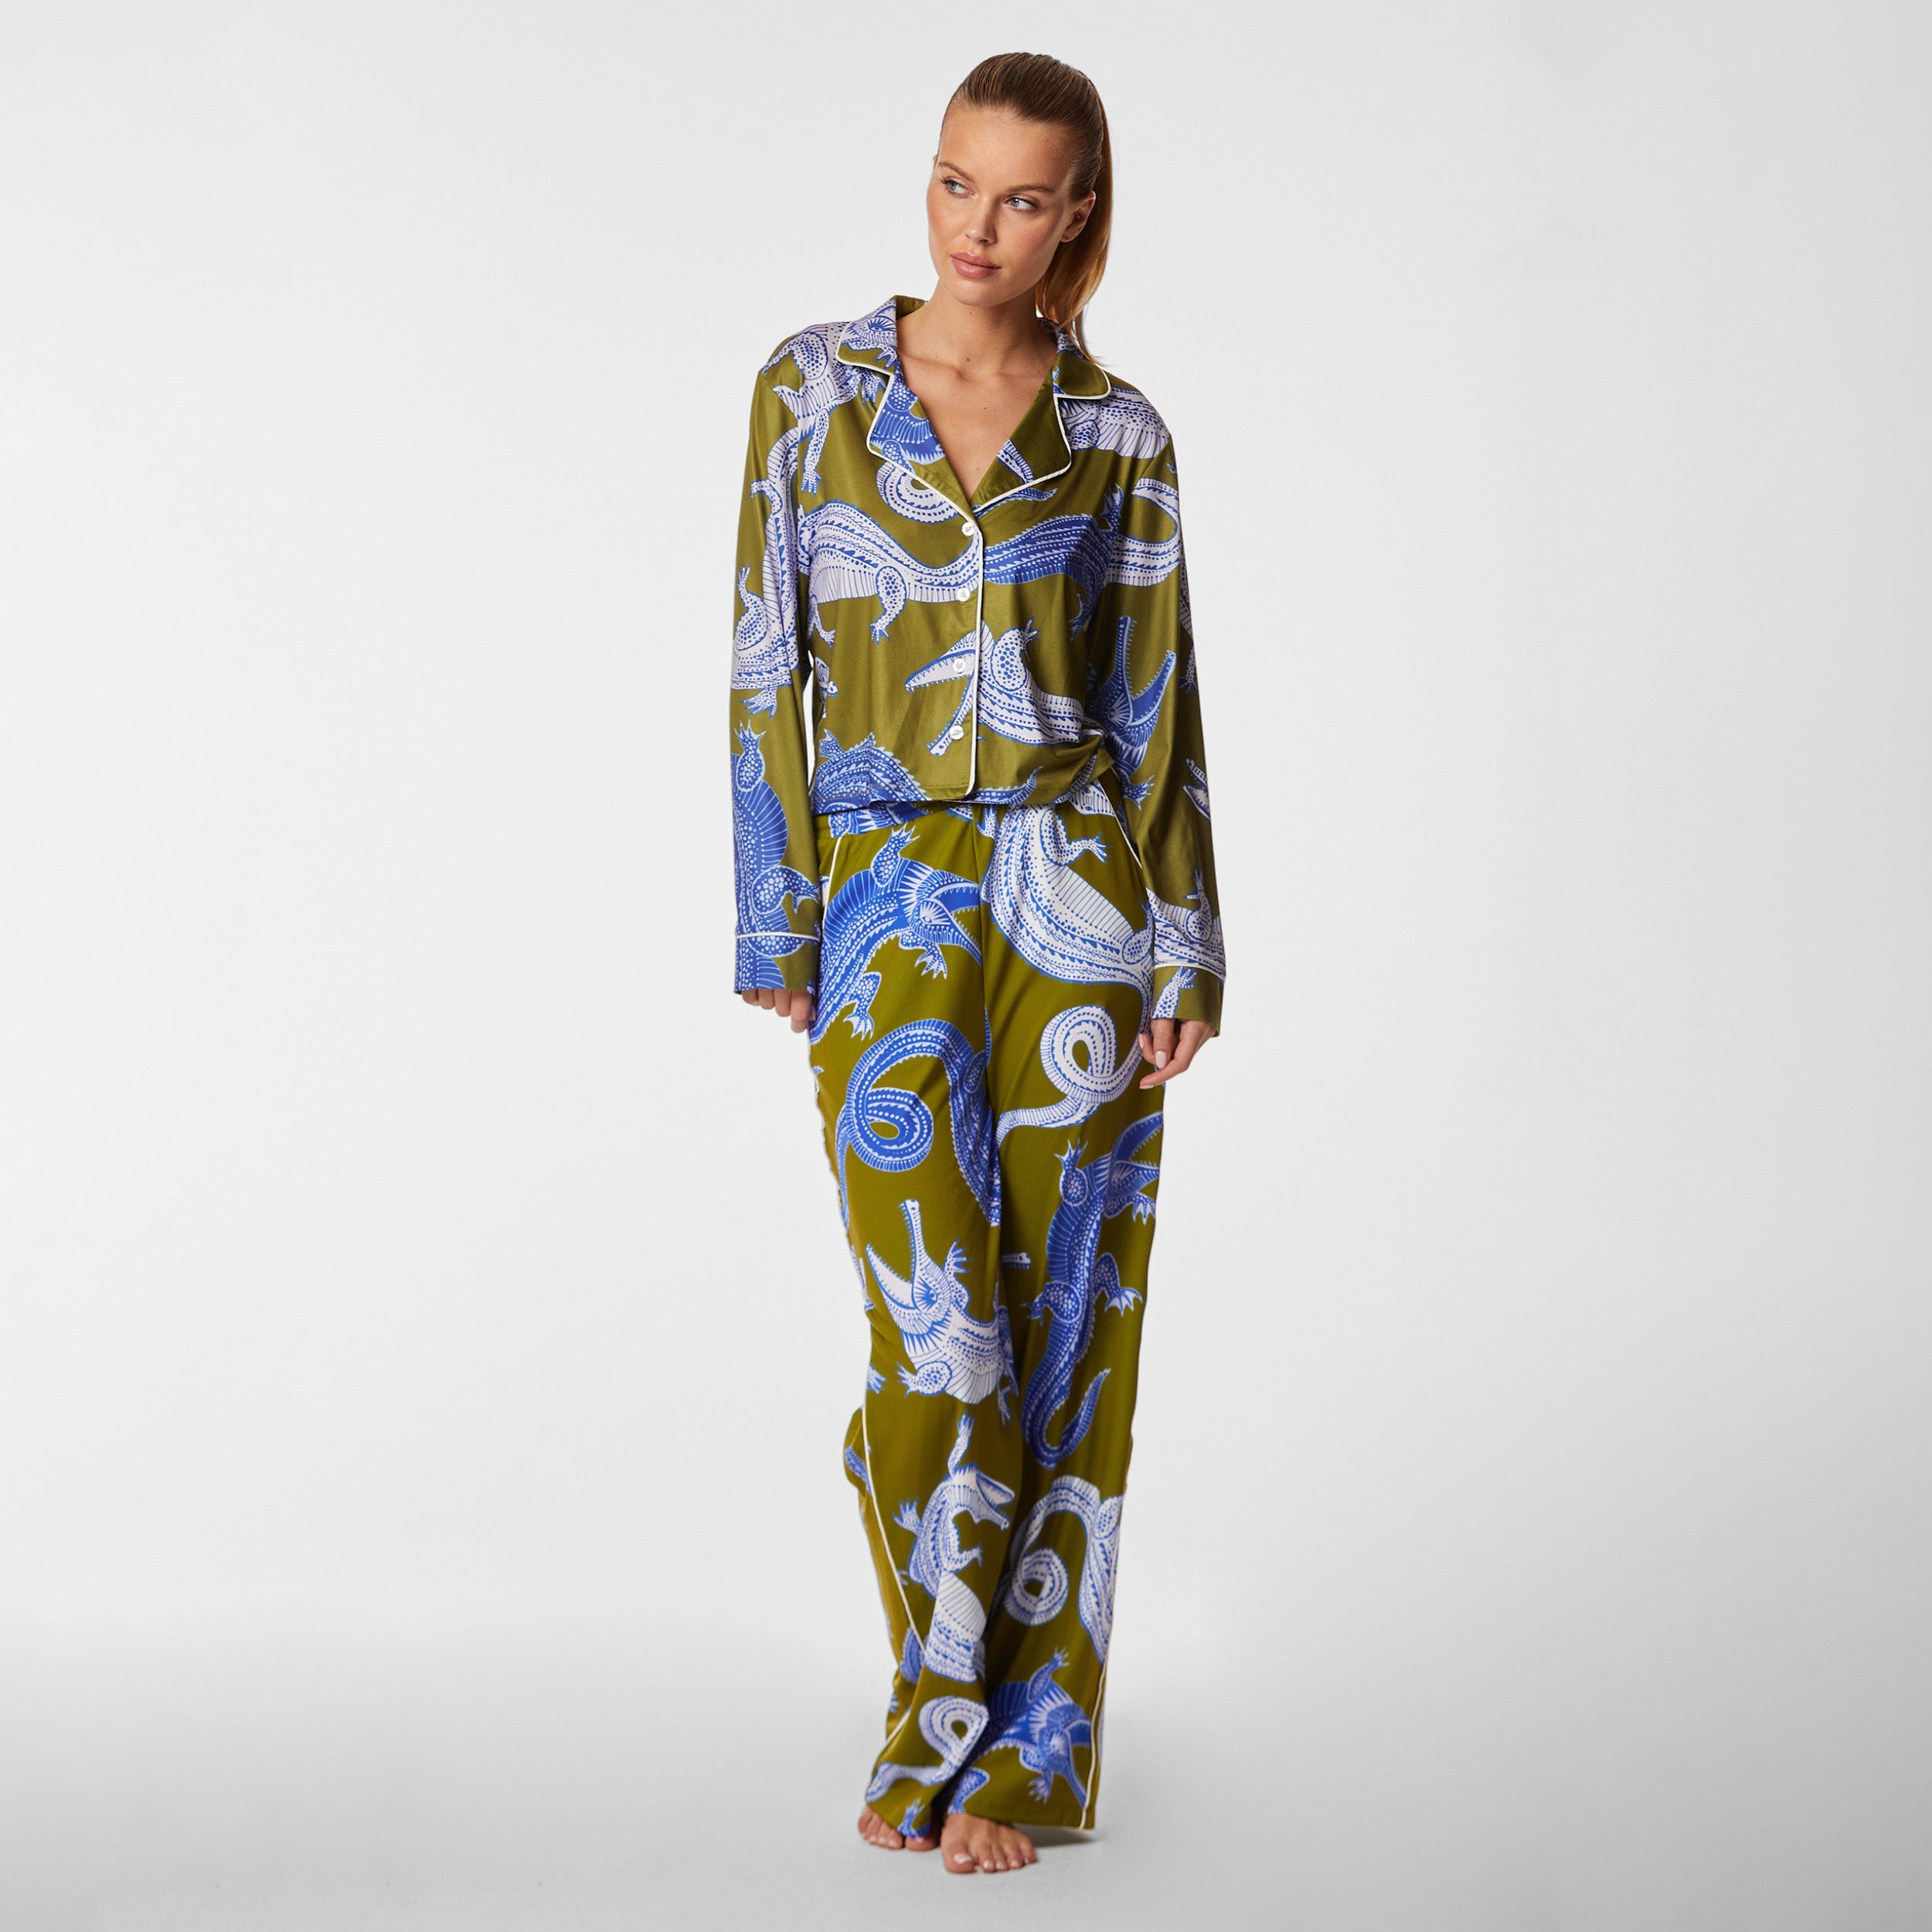 Full view of woman wearing breathable, relaxed and buttery smooth pajama shirt featuring a button front top with notch collar and Nile gator print.